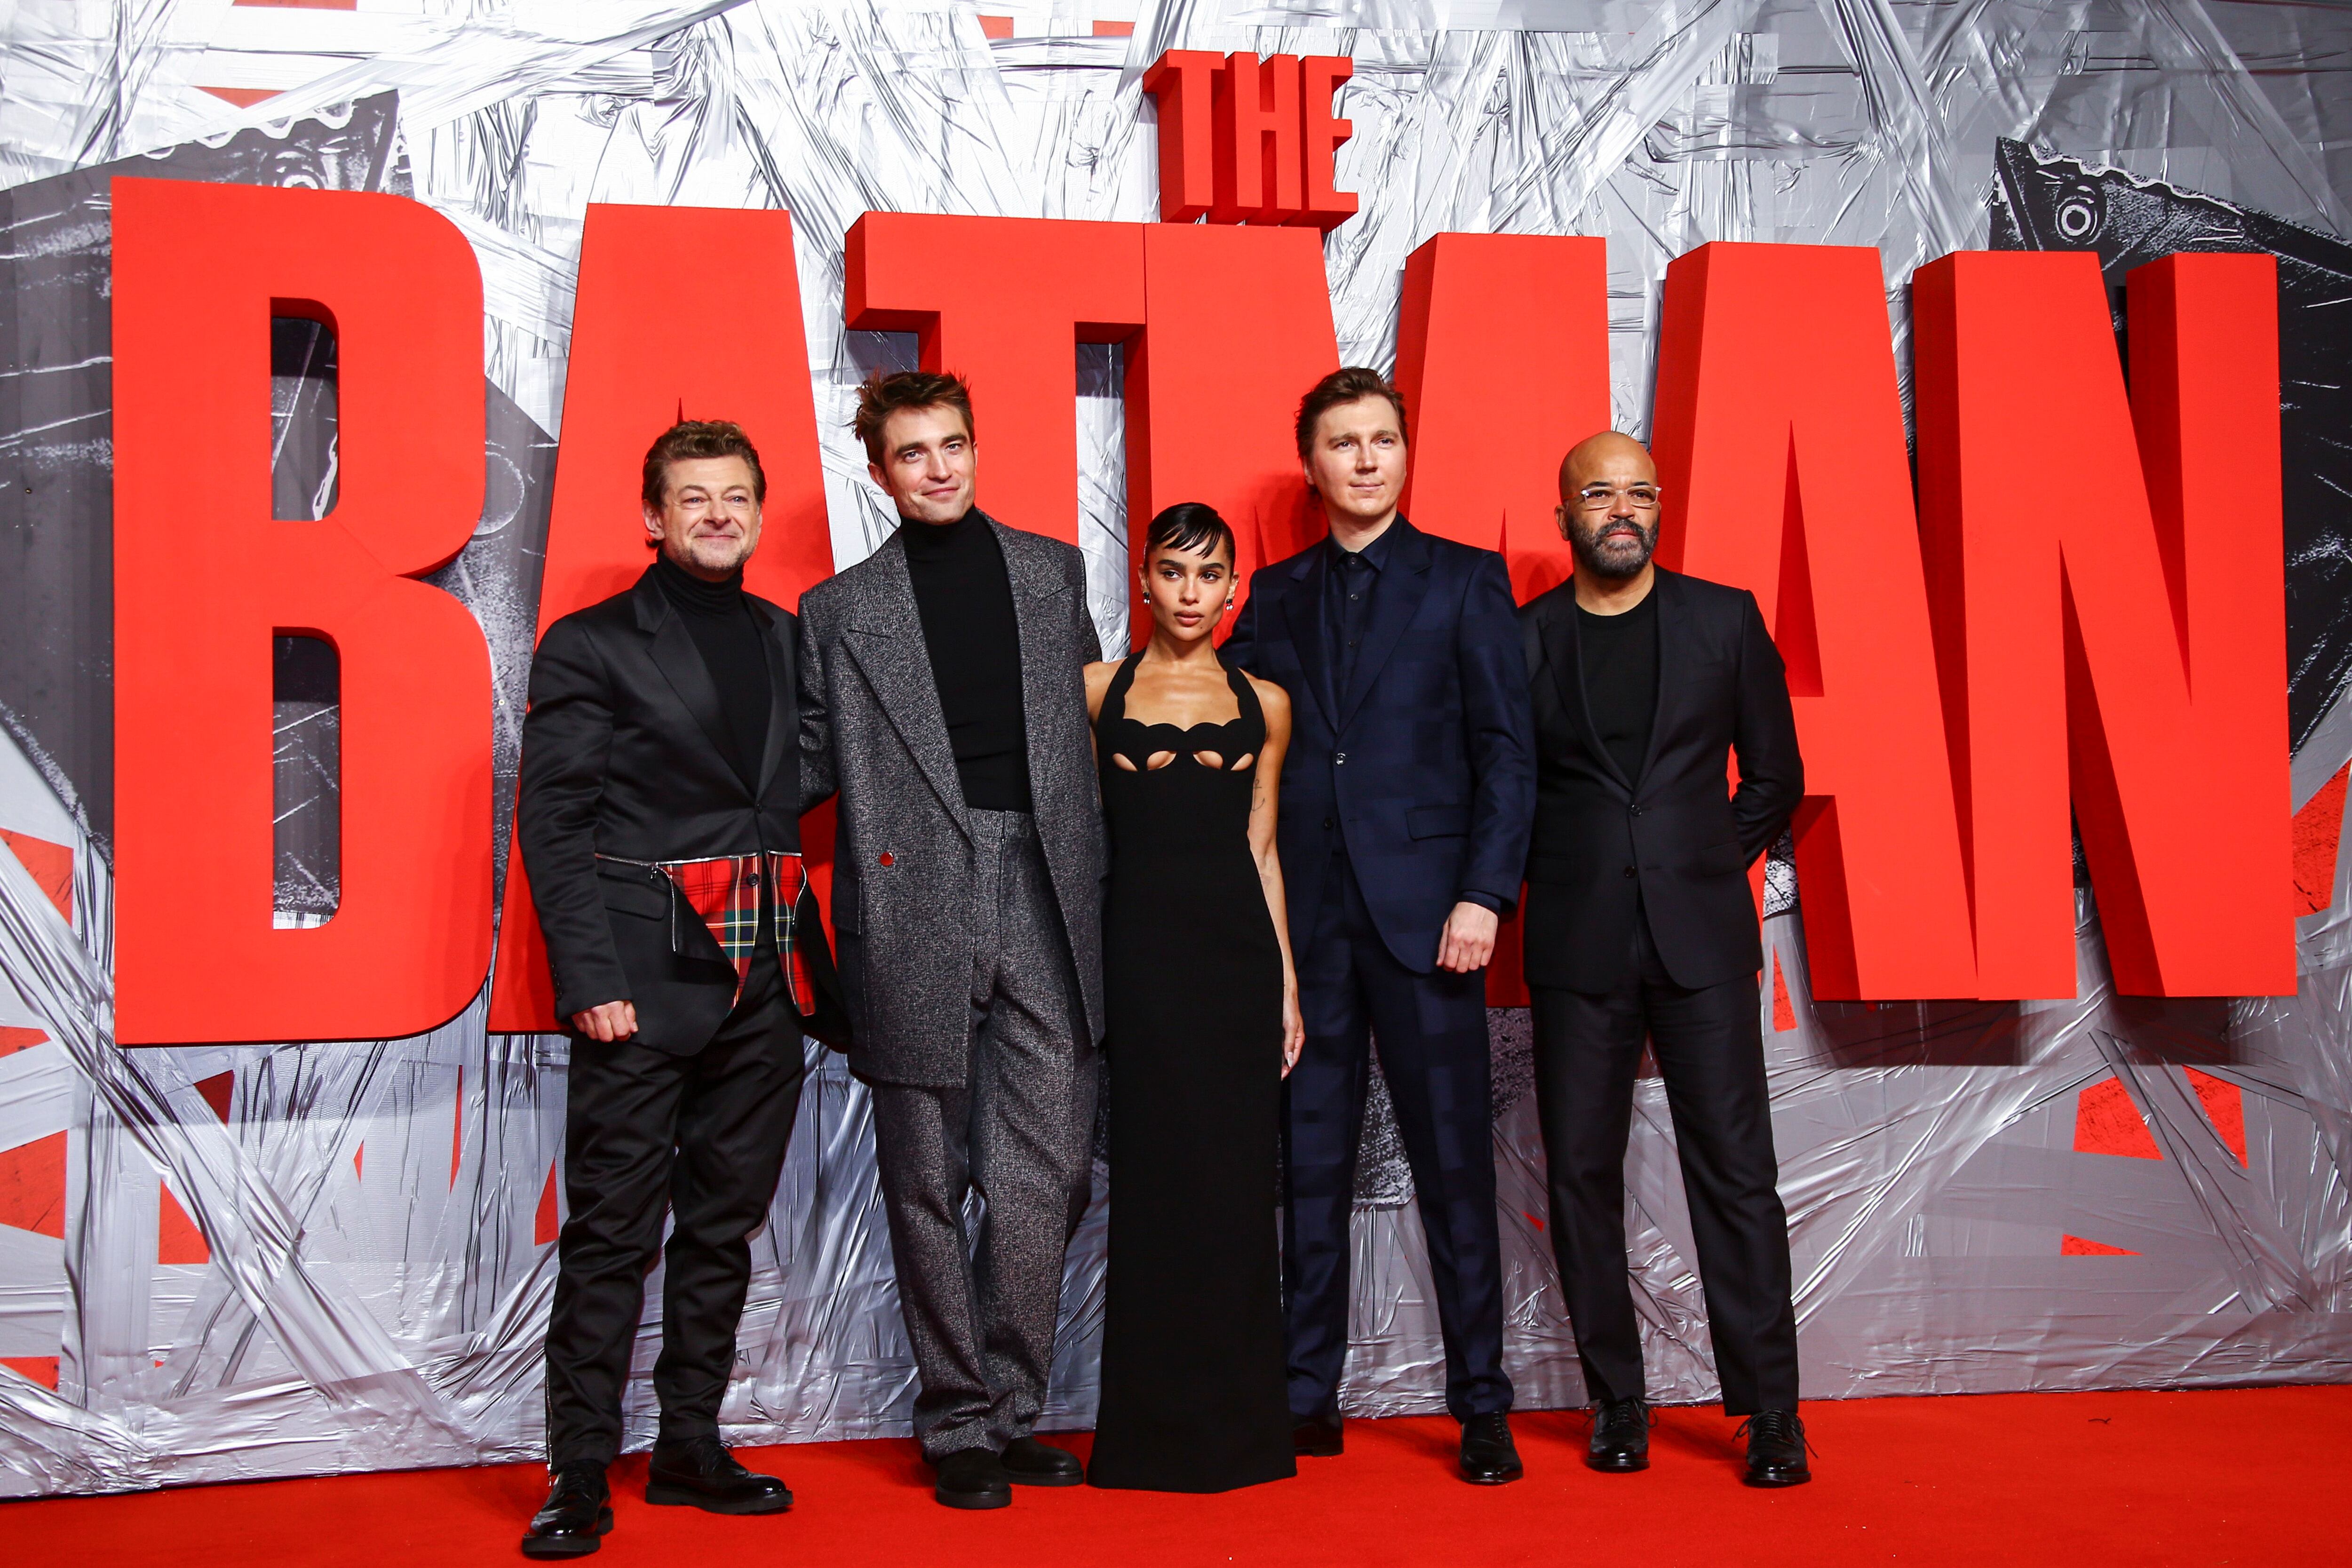 Hollywood halts releases in Russia, including ‘The Batman’